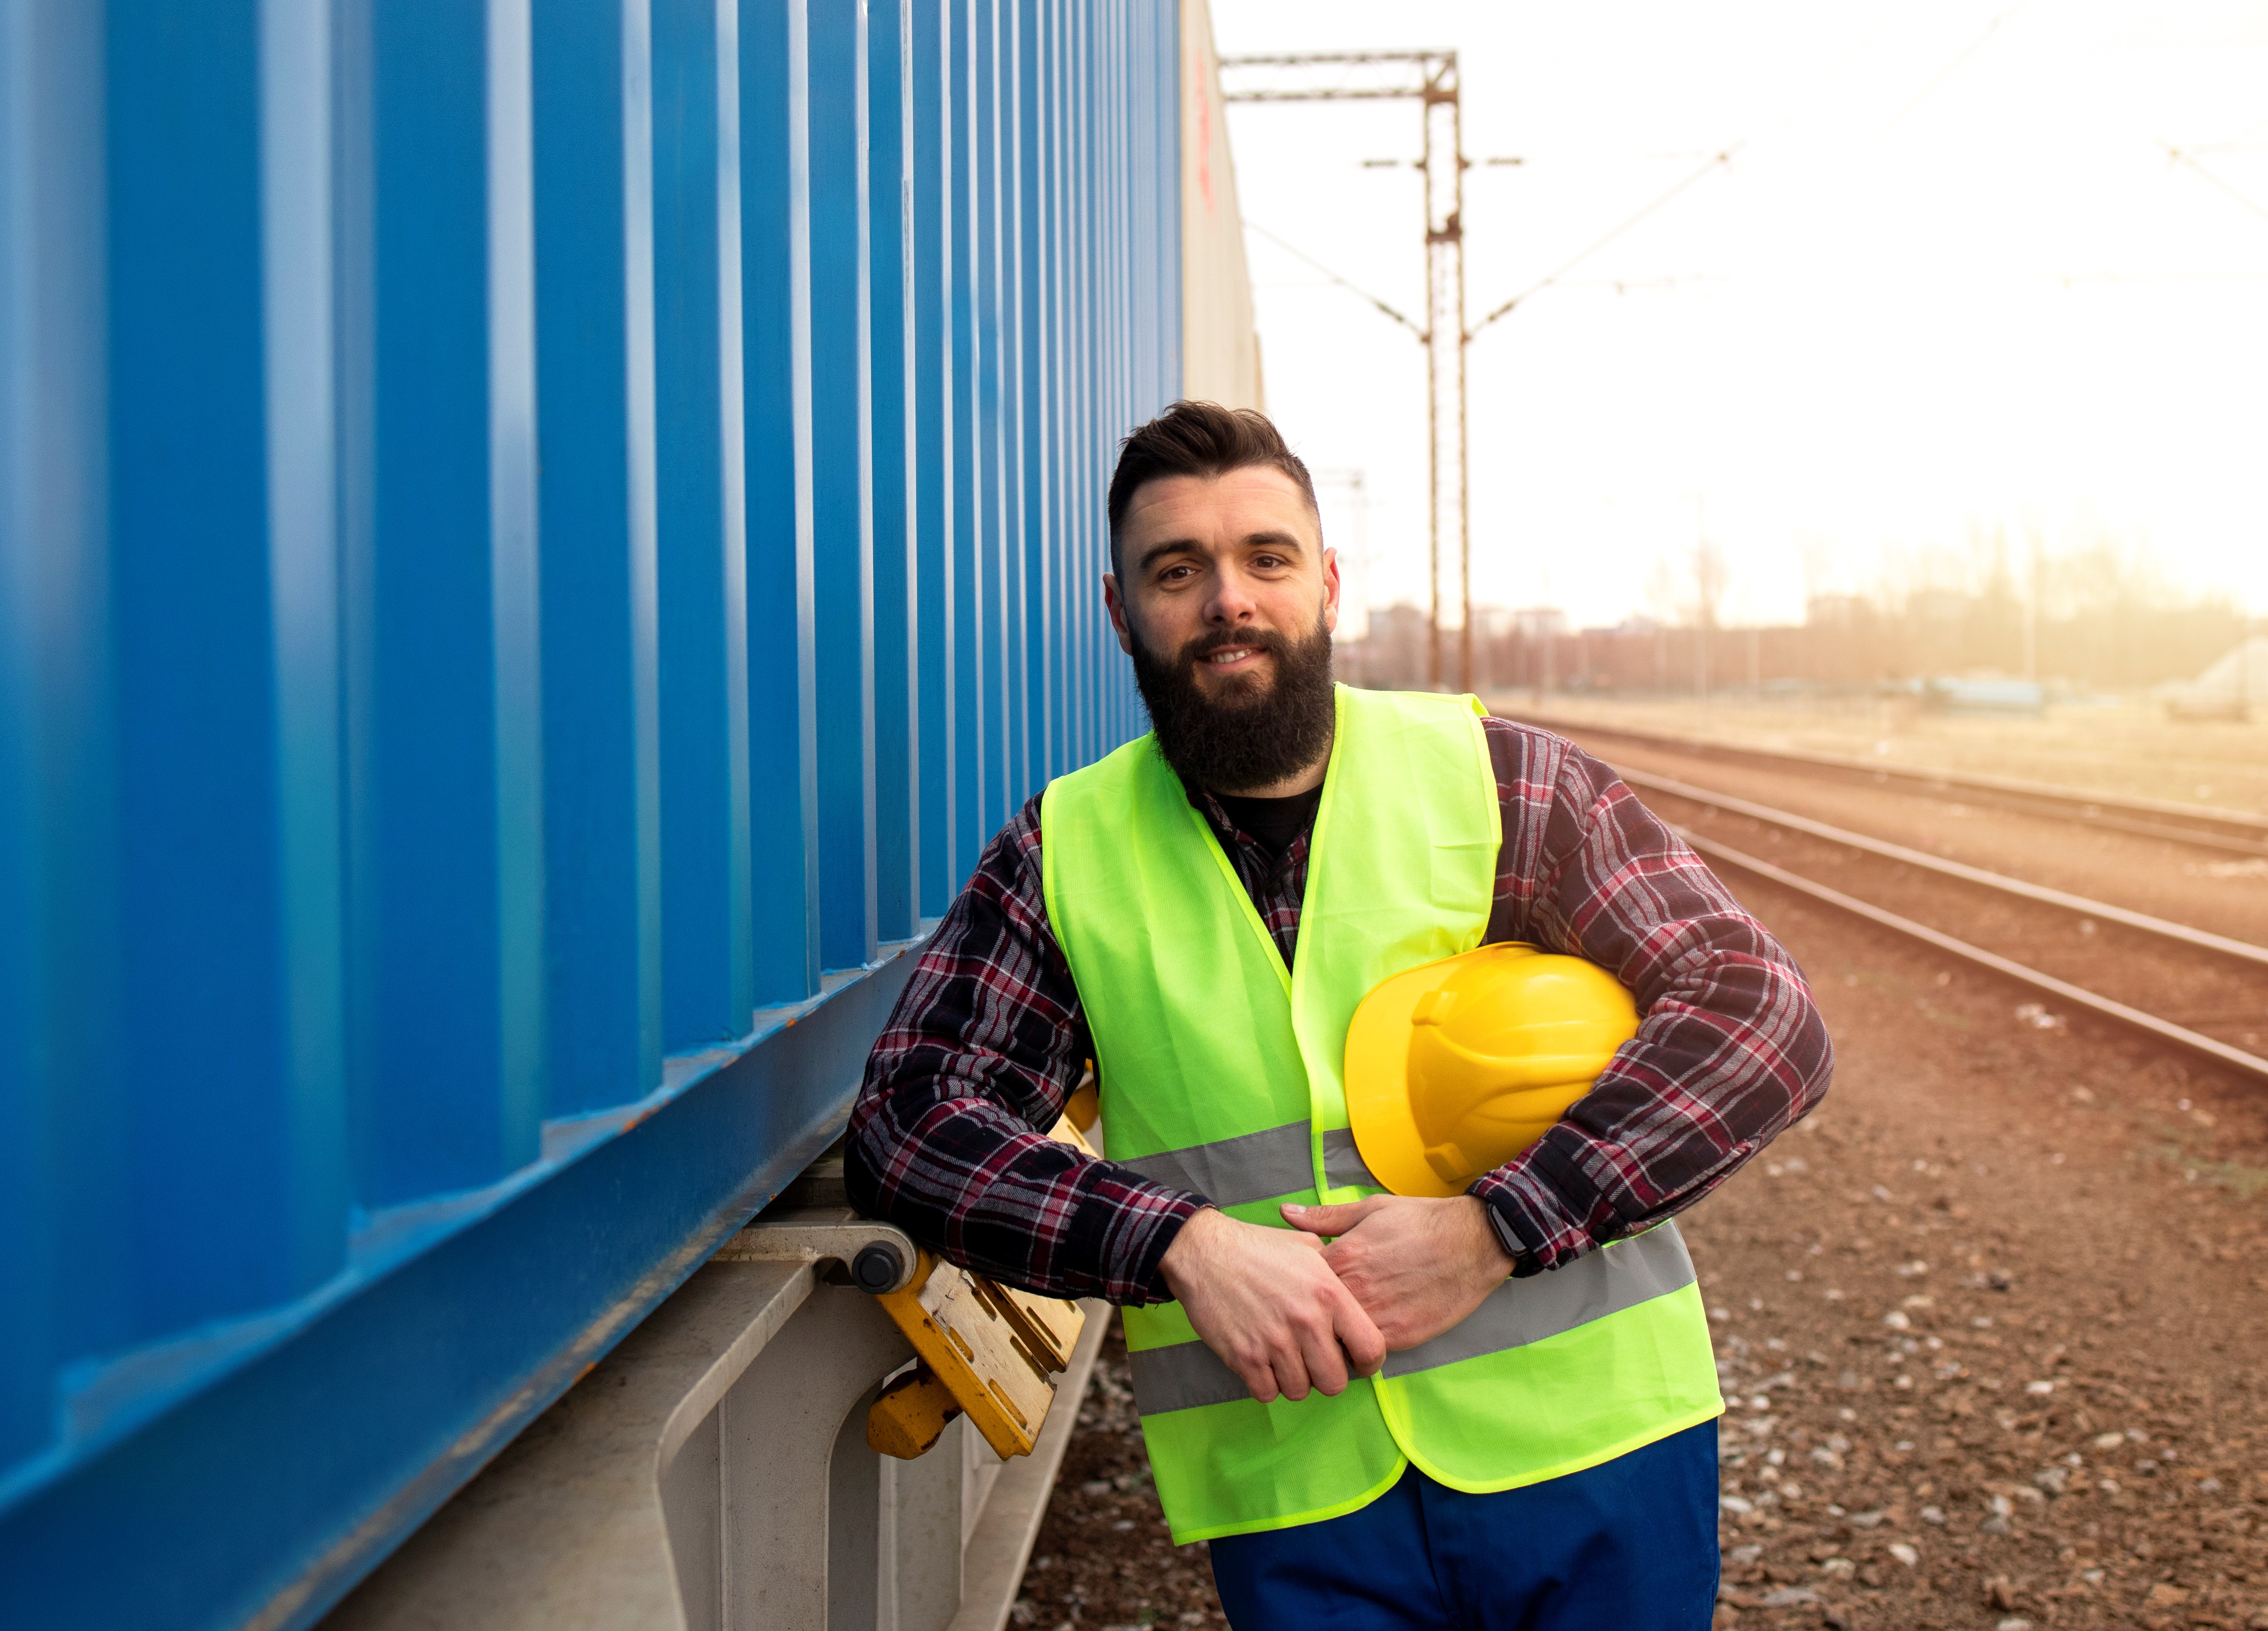 Man in high viz and holding hard hat by freight carriage